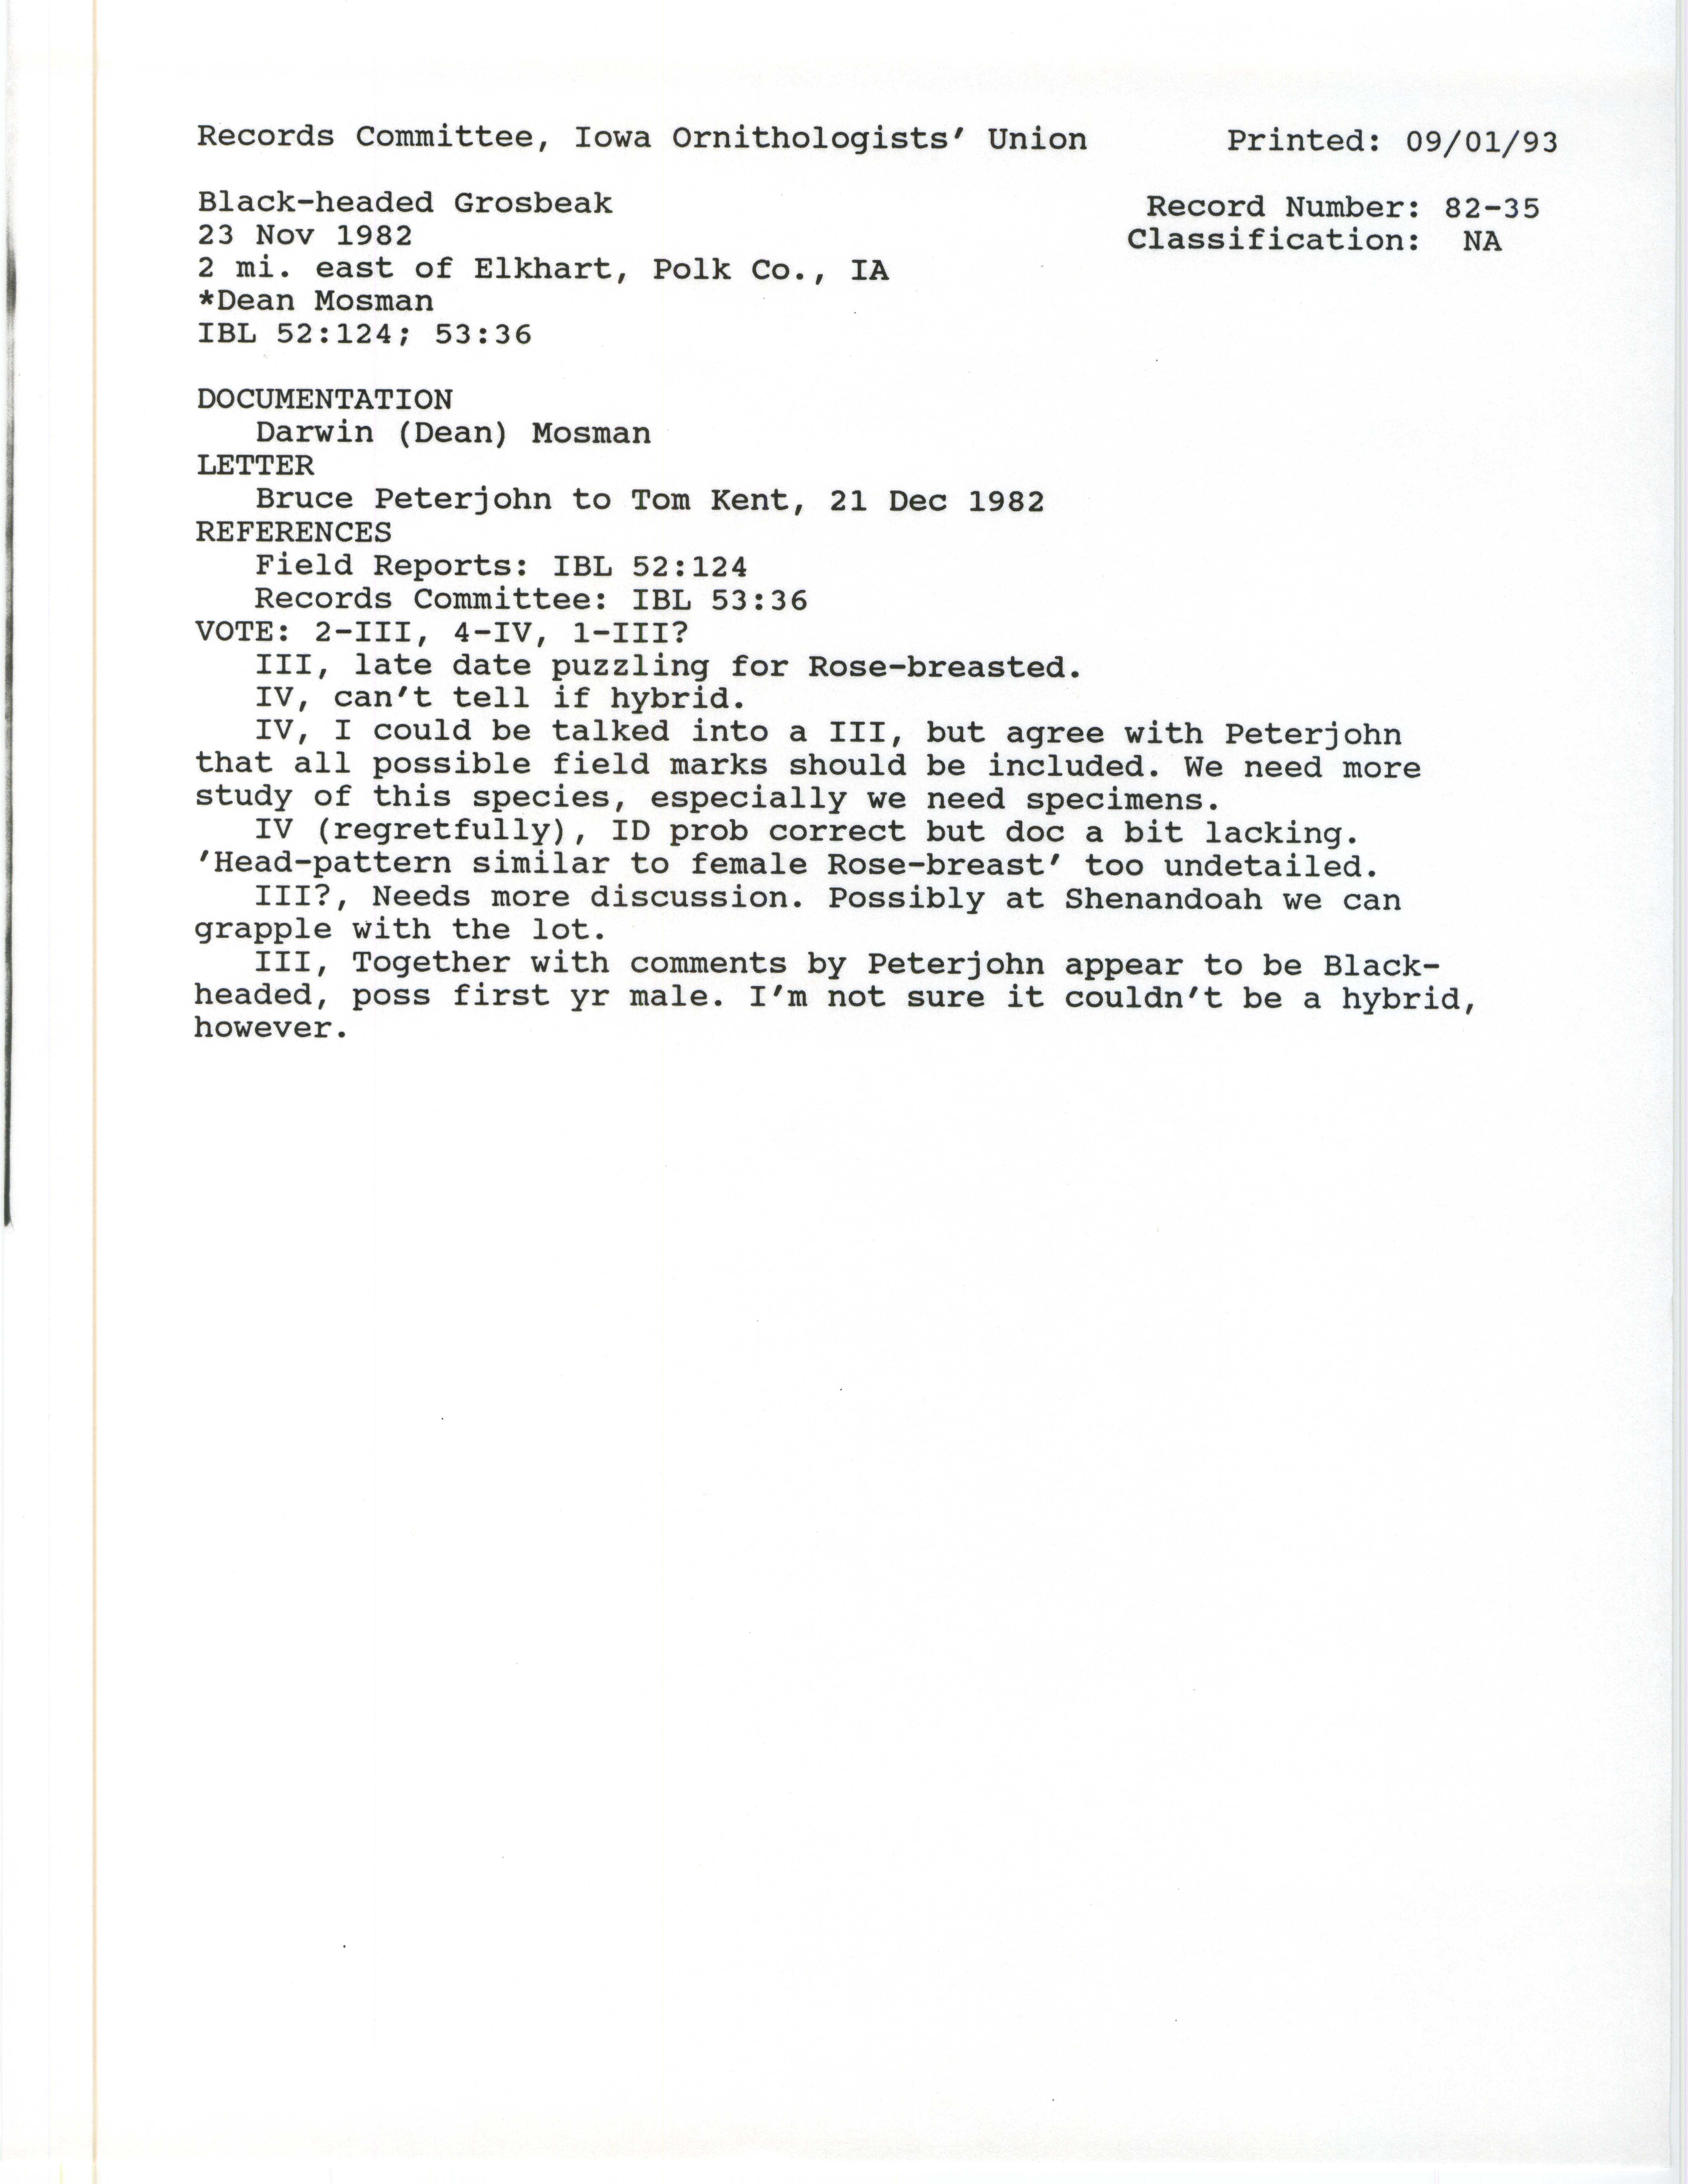 Records Committee review for rare bird sighting for Black-headed Grosbeak at Elkhart, 1982